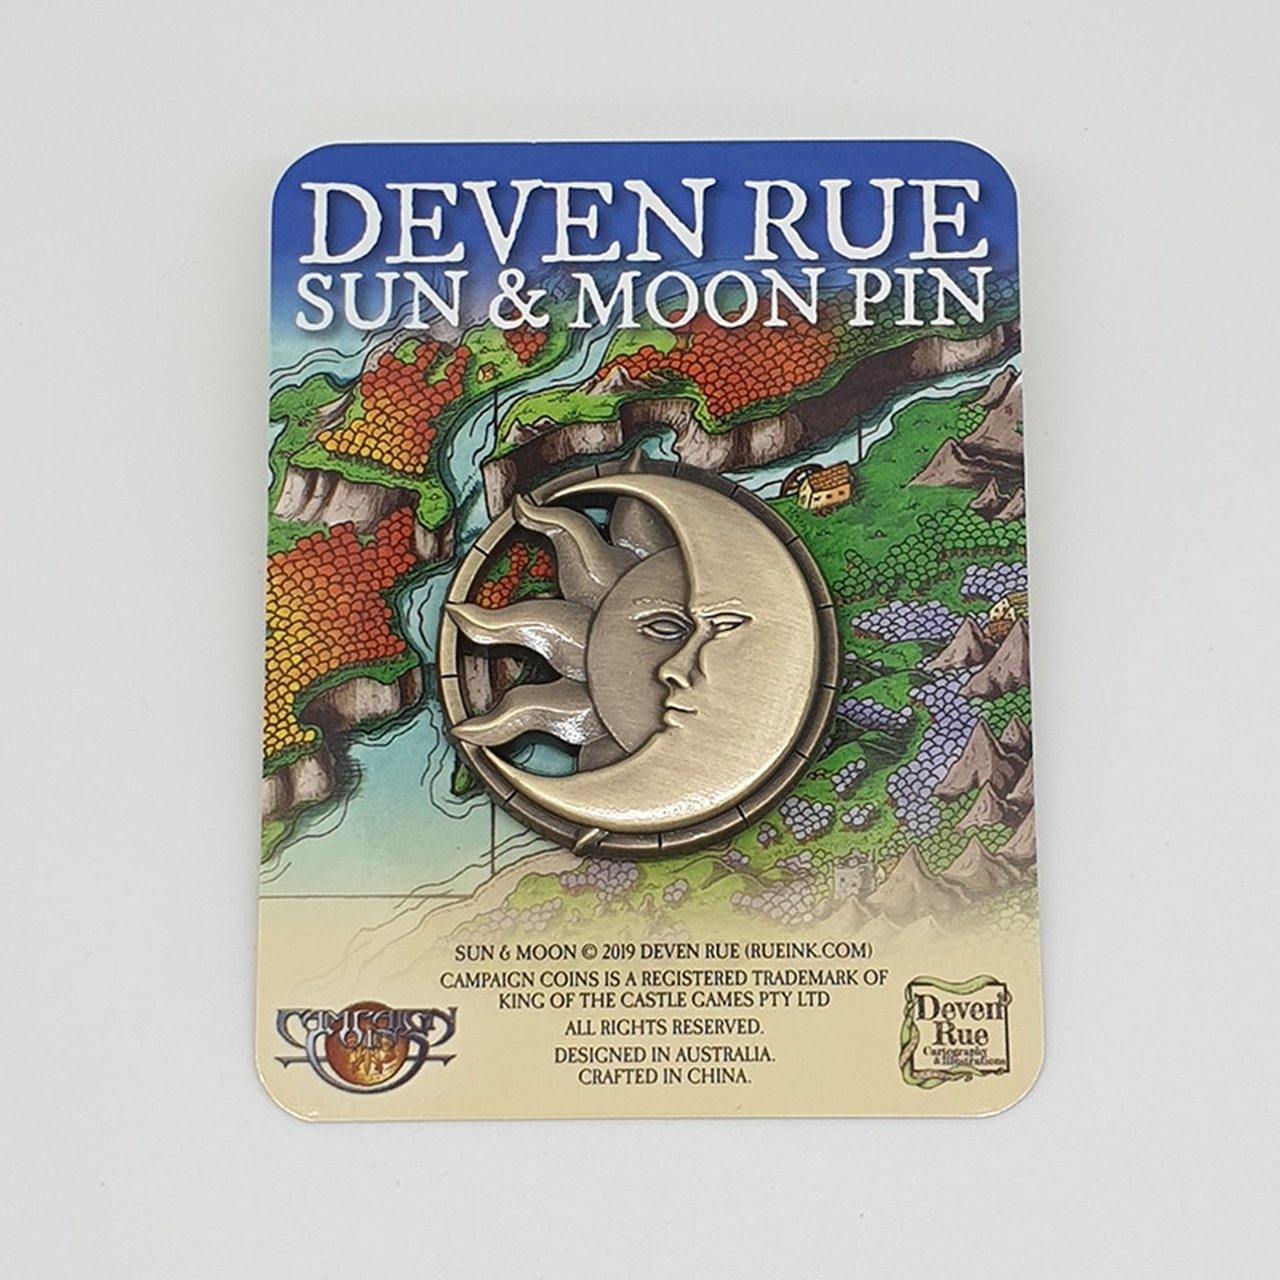 The Sun and Moon pin by Deven Rue with a cutout design of a sun and moon in the same circle, details carved into the relief.